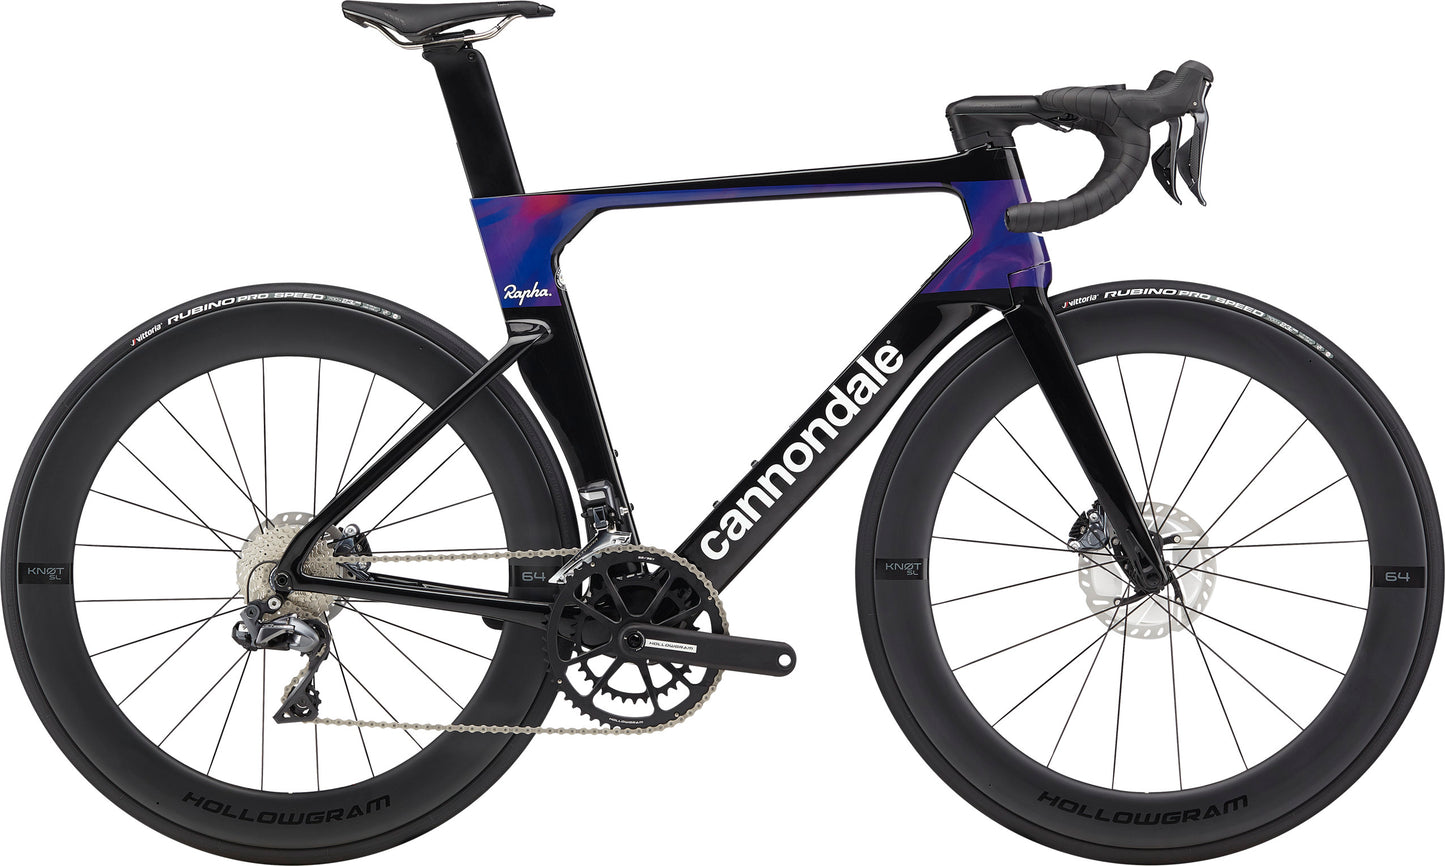 2021 Cannondale 700 M SystemSix Crb Ult Di2